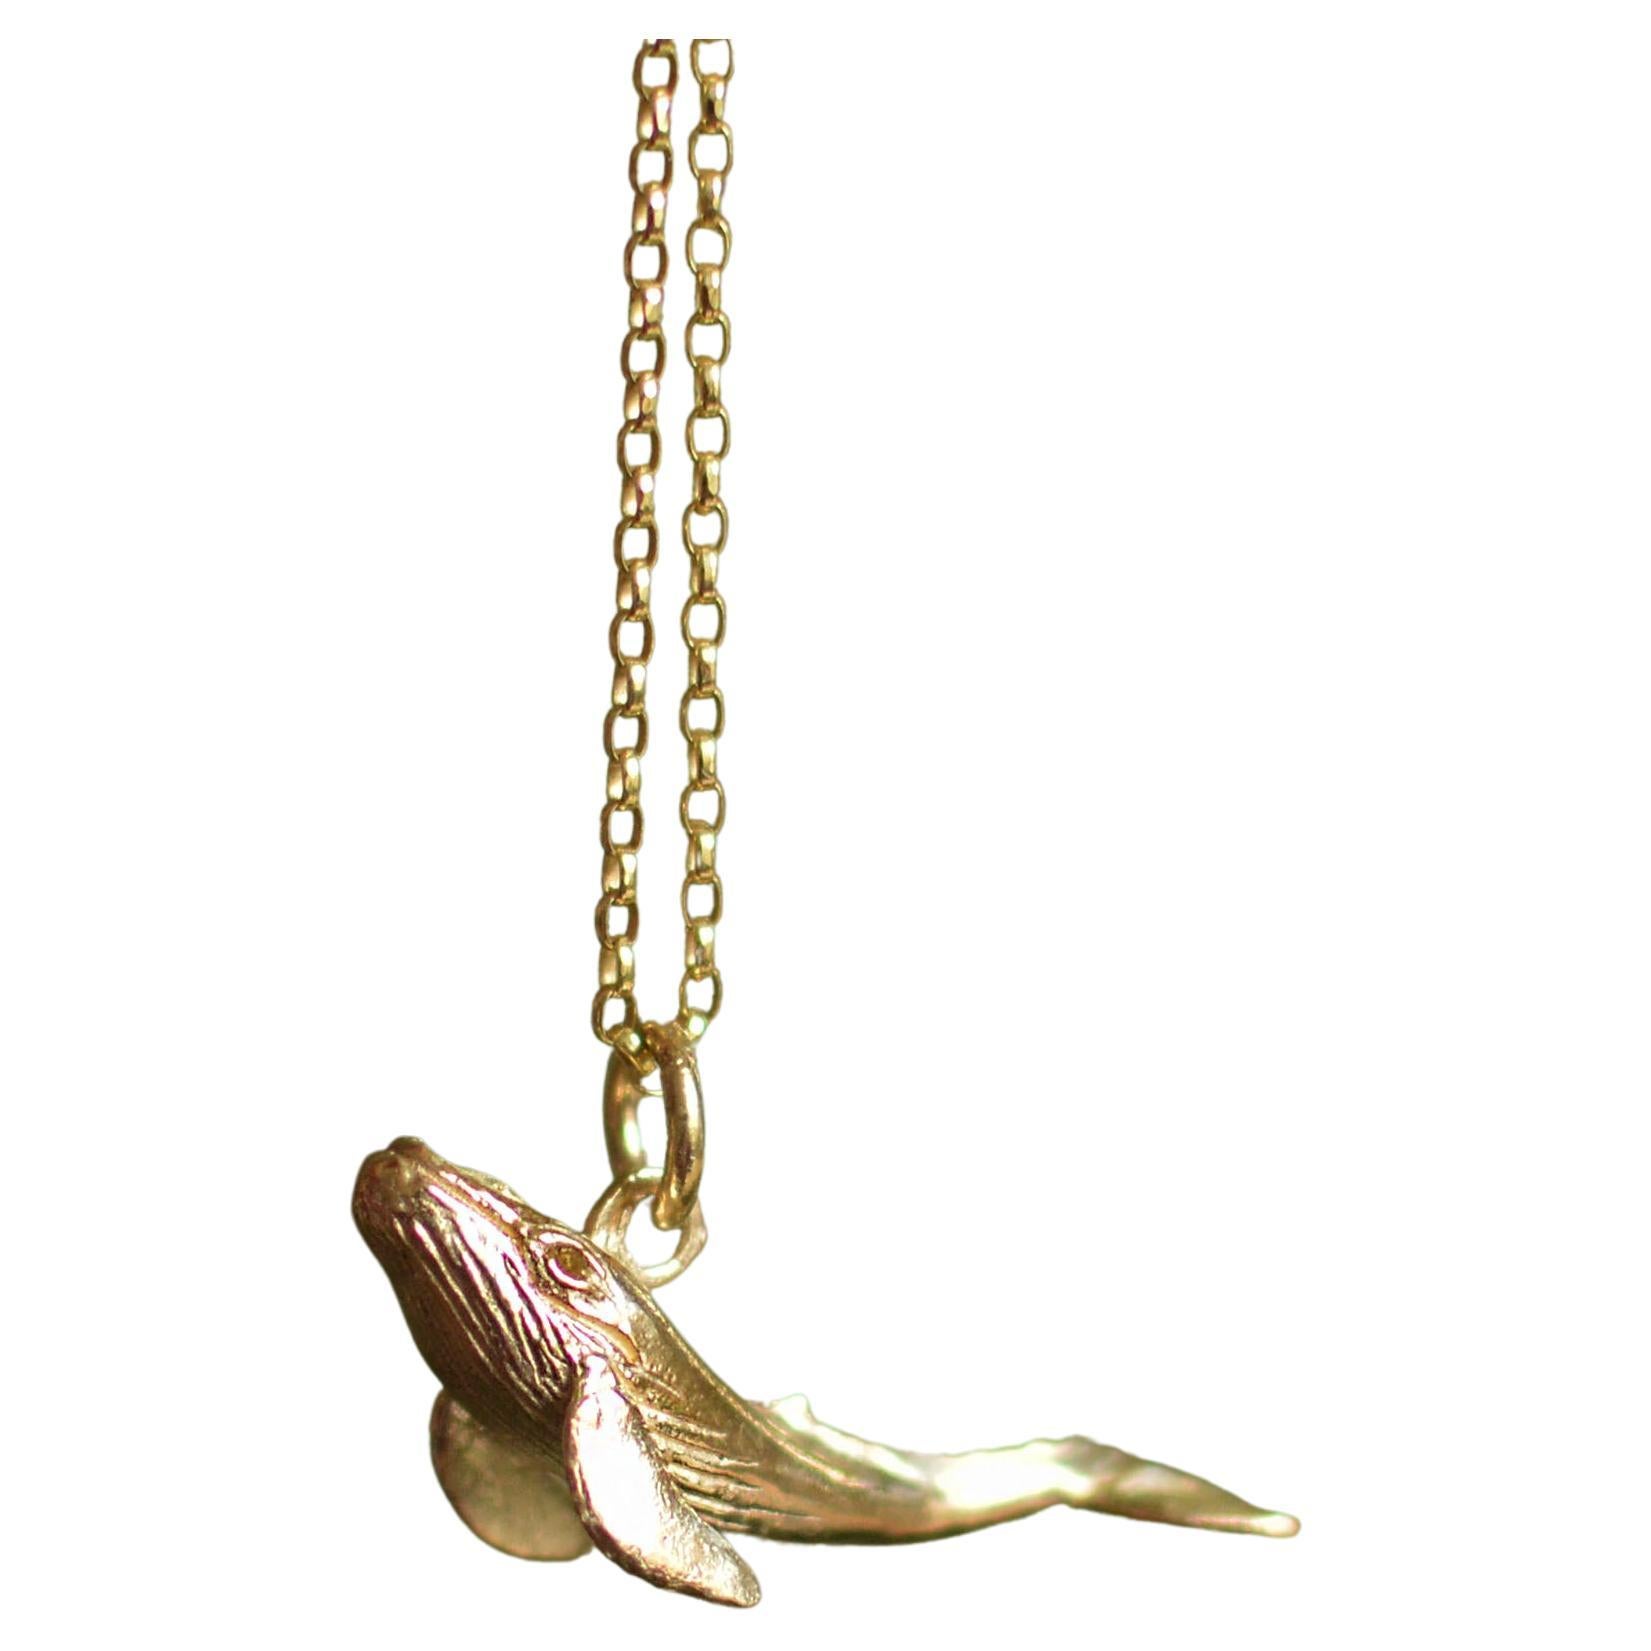 Solid 18 Carat Gold Baby Whale Pendant by Lucy Stopes-Roe